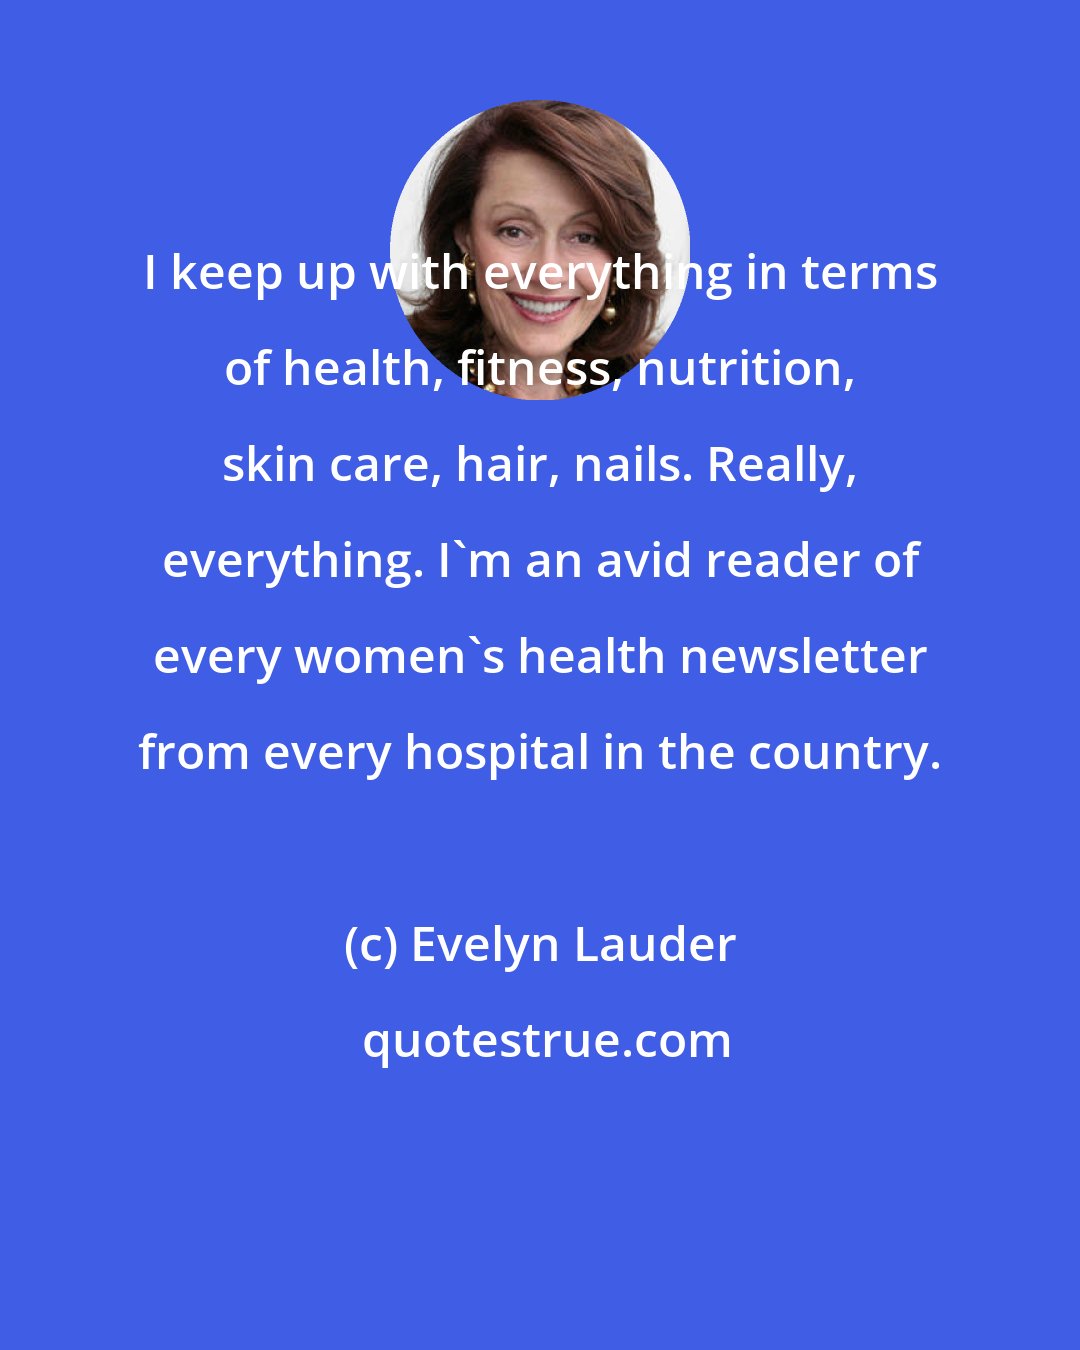 Evelyn Lauder: I keep up with everything in terms of health, fitness, nutrition, skin care, hair, nails. Really, everything. I'm an avid reader of every women's health newsletter from every hospital in the country.